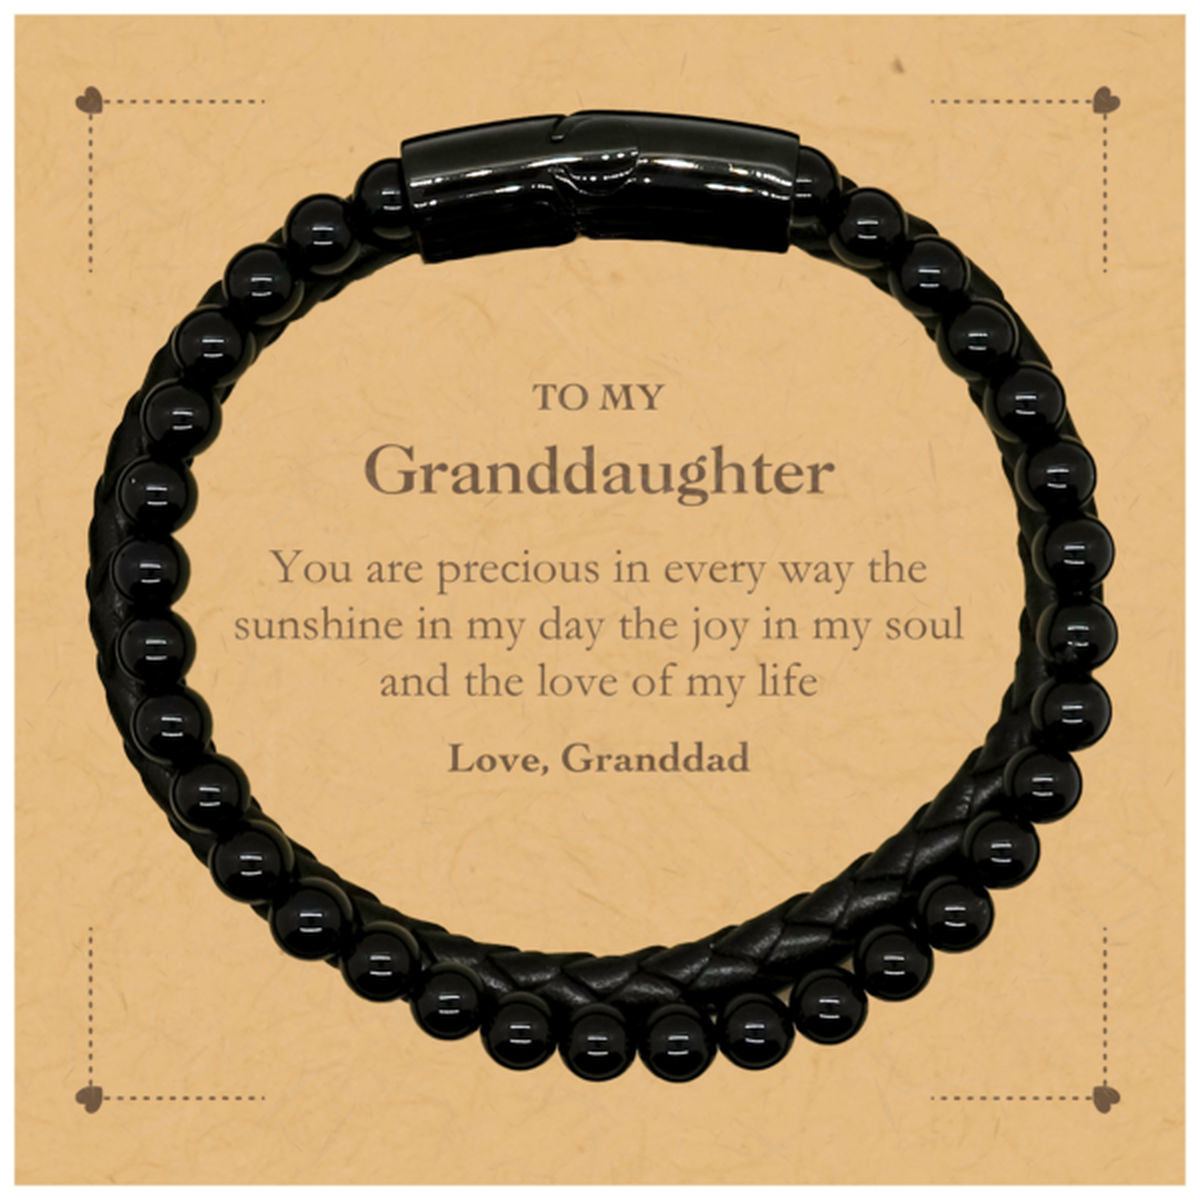 Graduation Gifts for Granddaughter Stone Leather Bracelets Present from Granddad, Christmas Granddaughter Birthday Gifts Granddaughter You are precious in every way the sunshine in my day. Love, Granddad